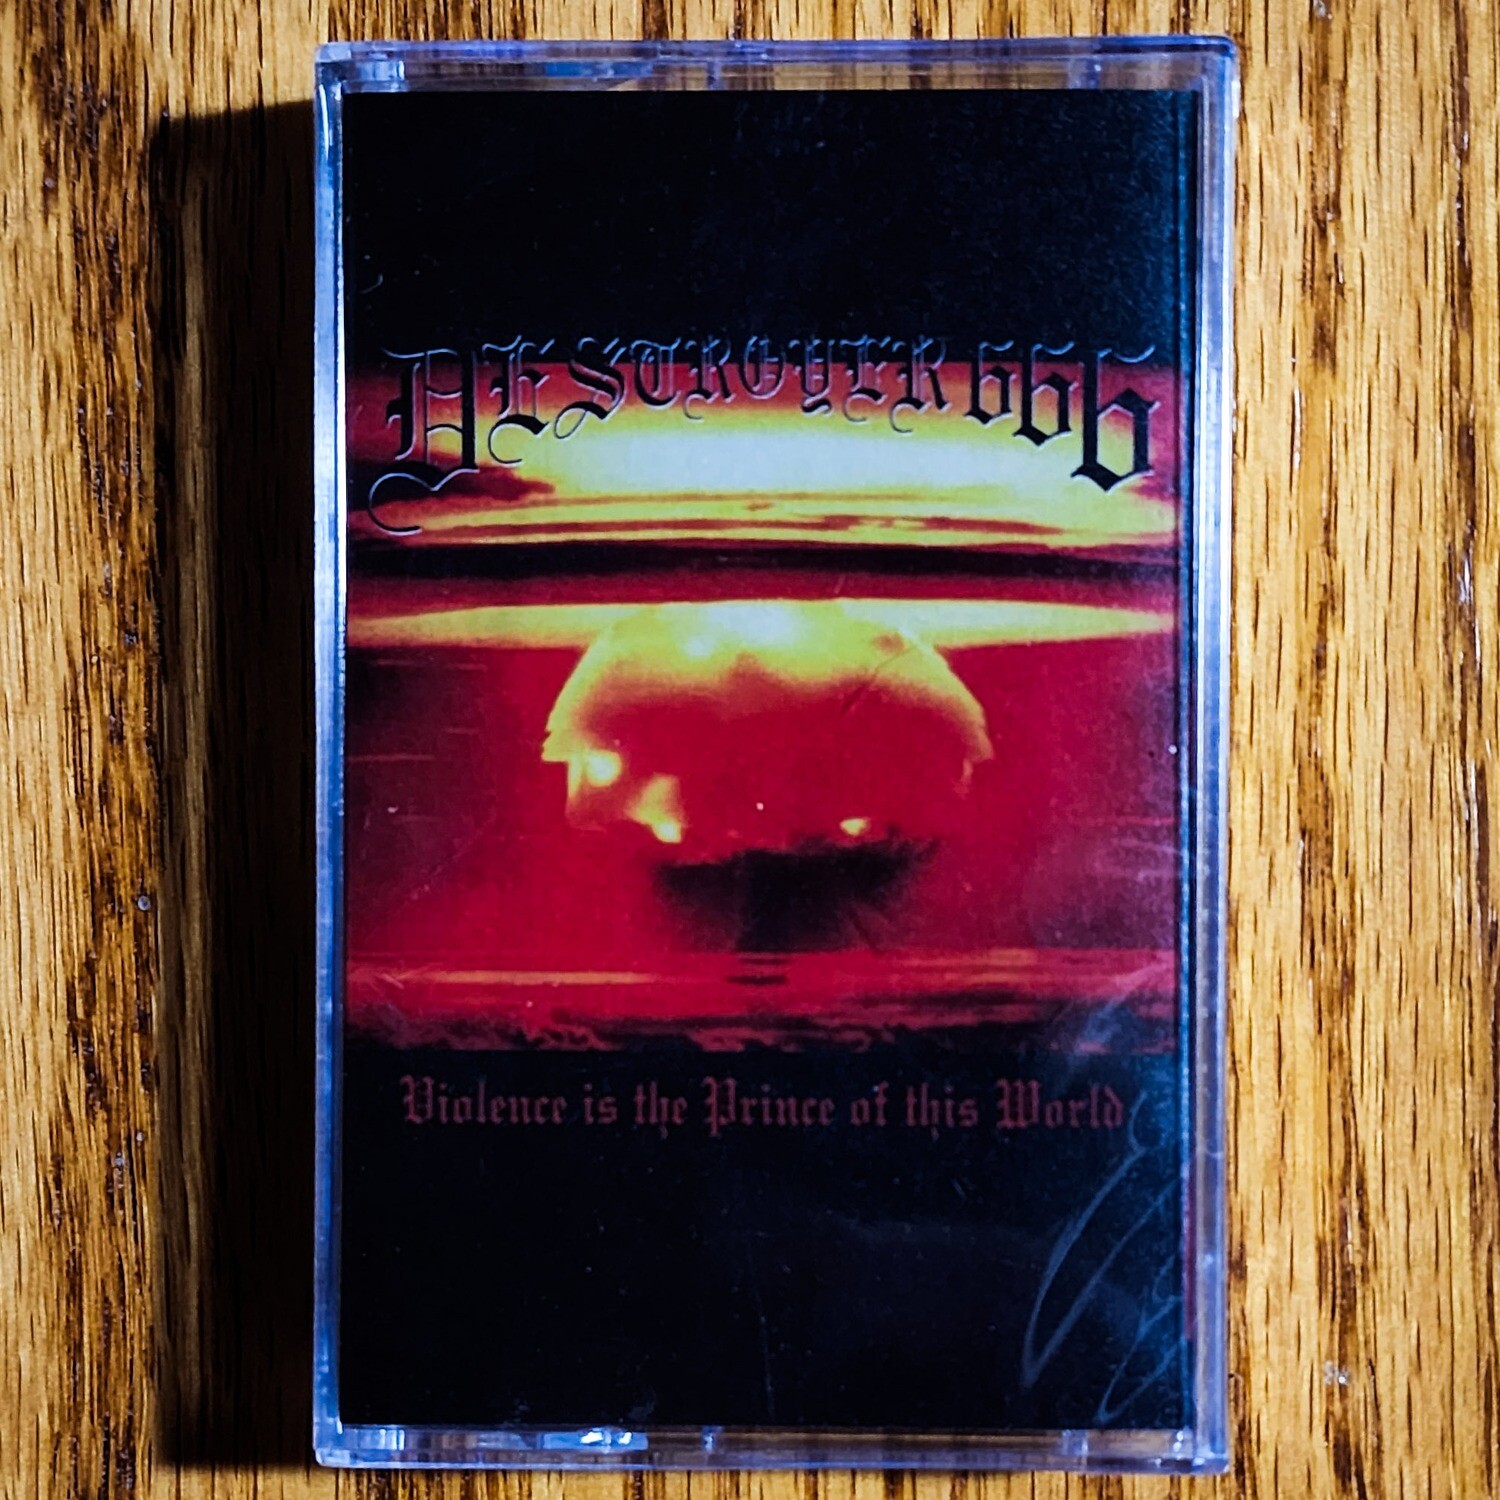 DESTROYER 666 (AUS) - Violence Is the Prince of This World [MC-CASSETTE]